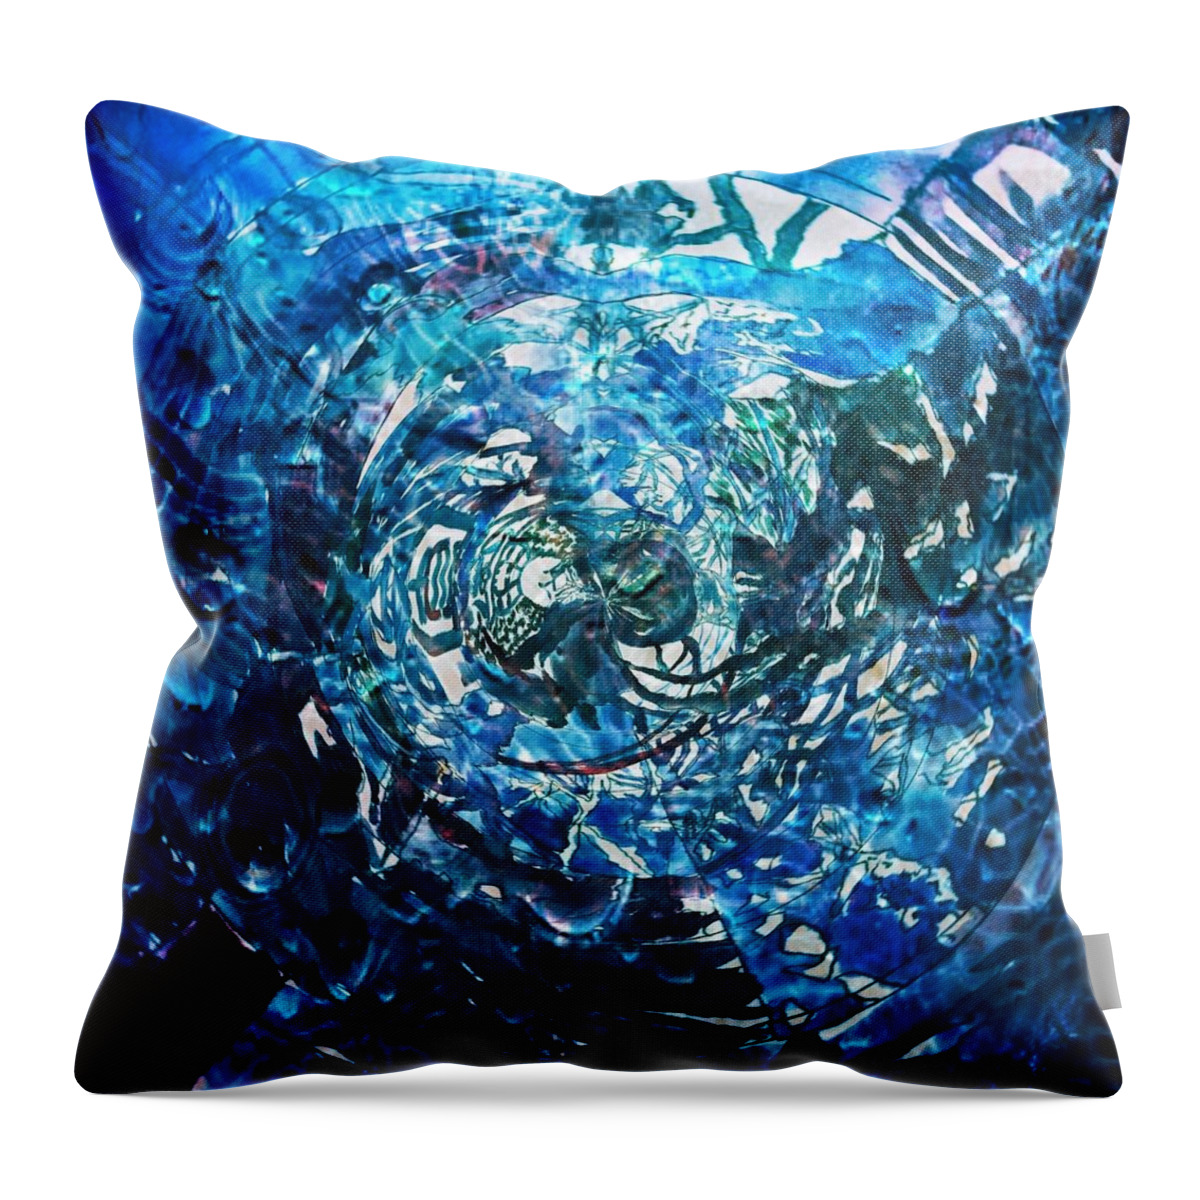 Water Throw Pillow featuring the digital art Puddle by Angela Weddle